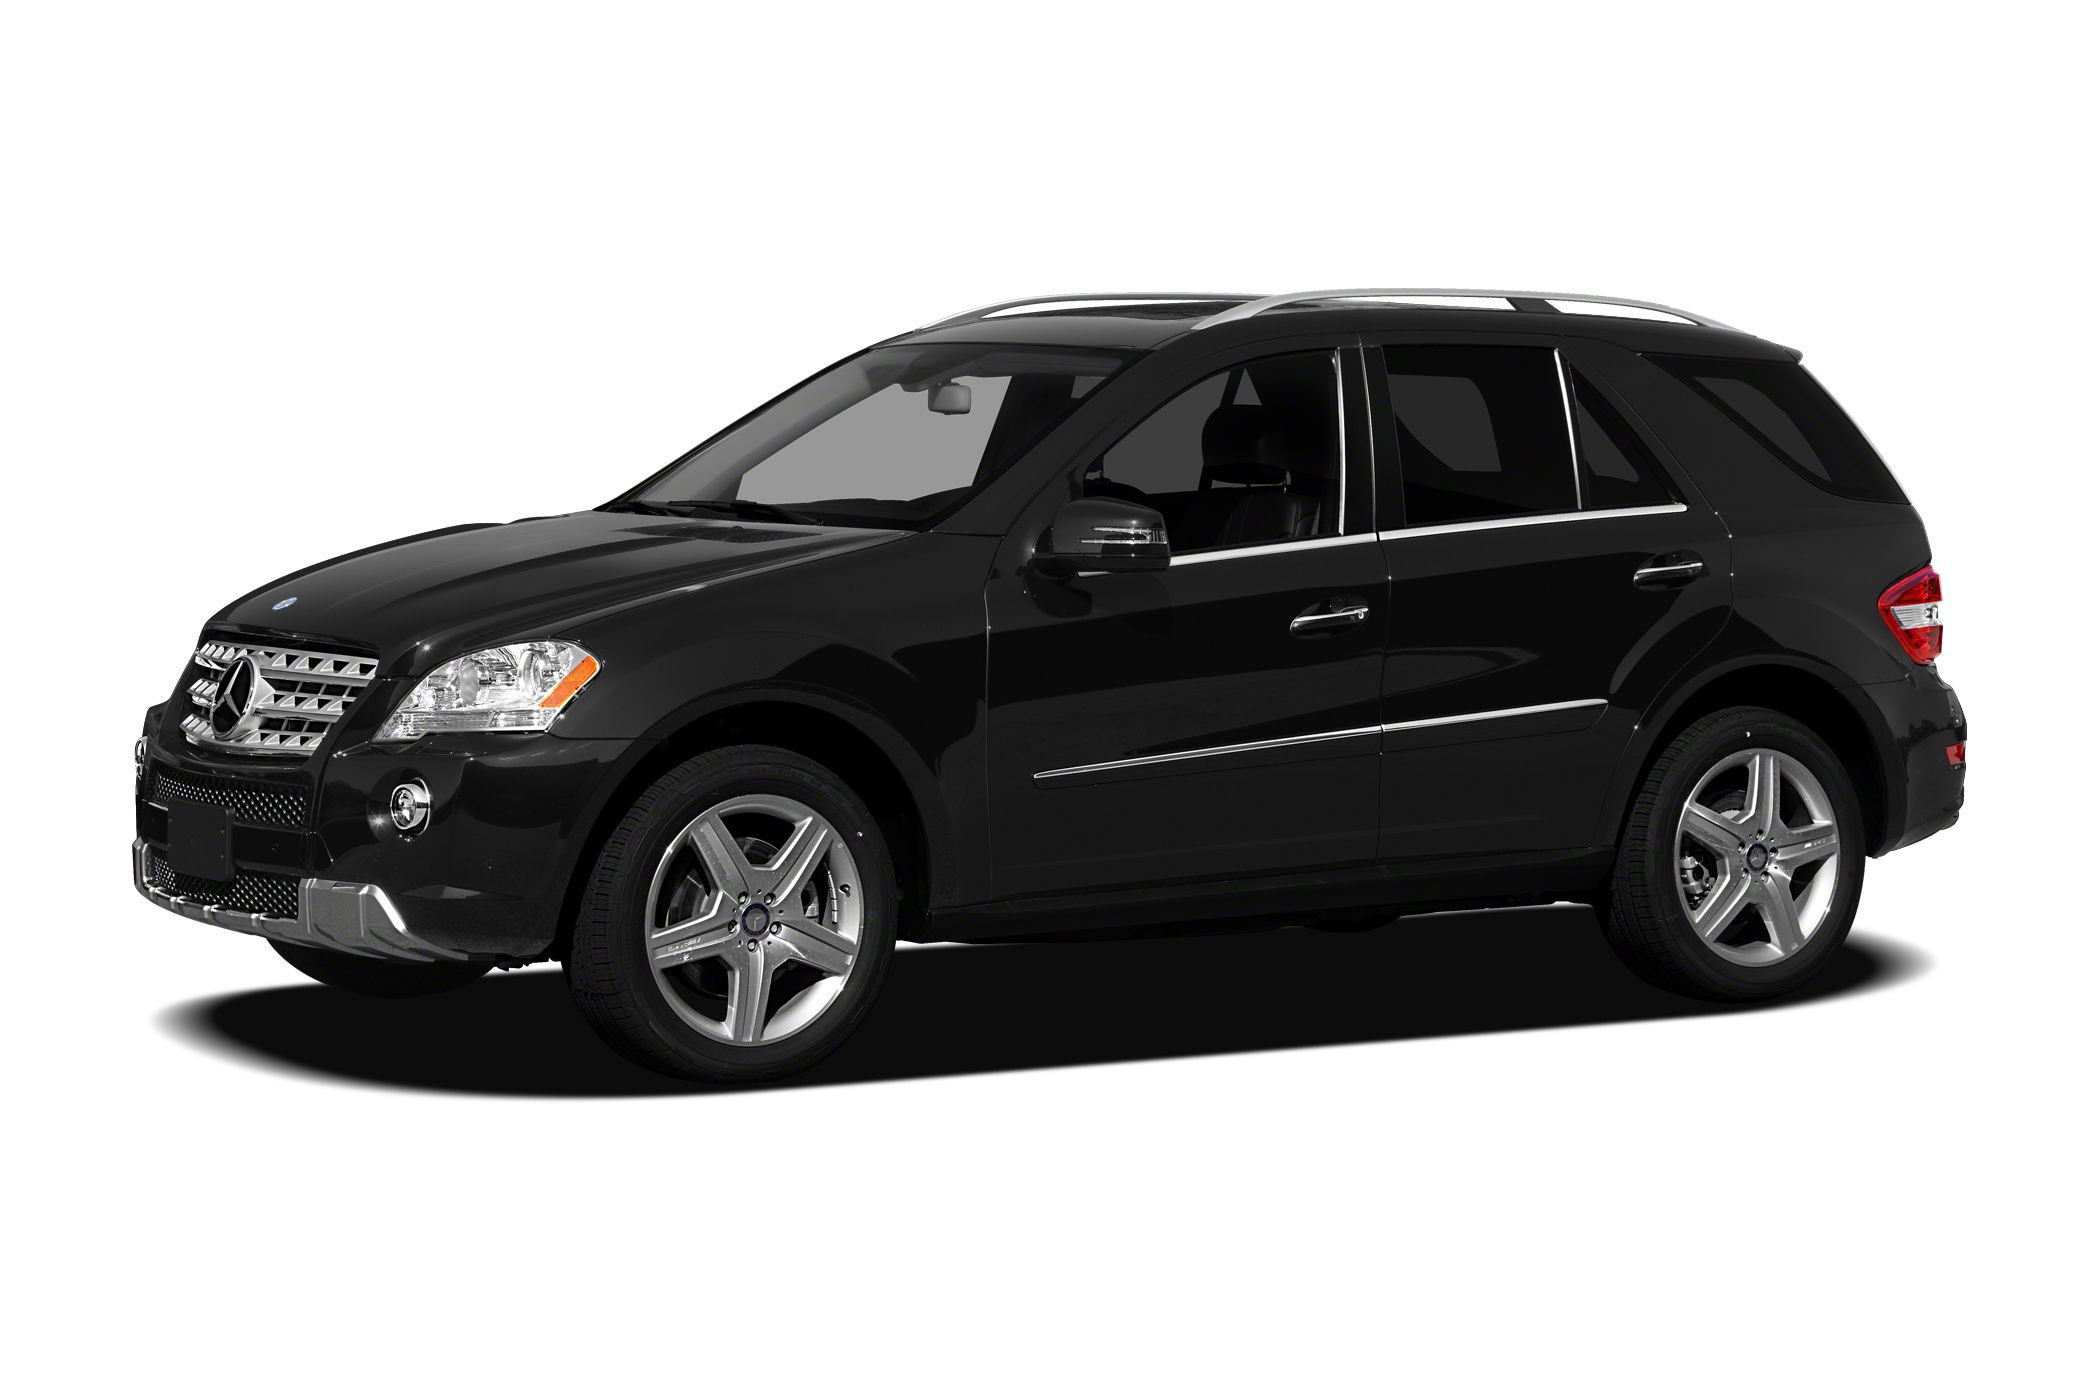 09 Mercedes Benz M Class Base Ml 550 4dr All Wheel Drive 4matic Specs And Prices